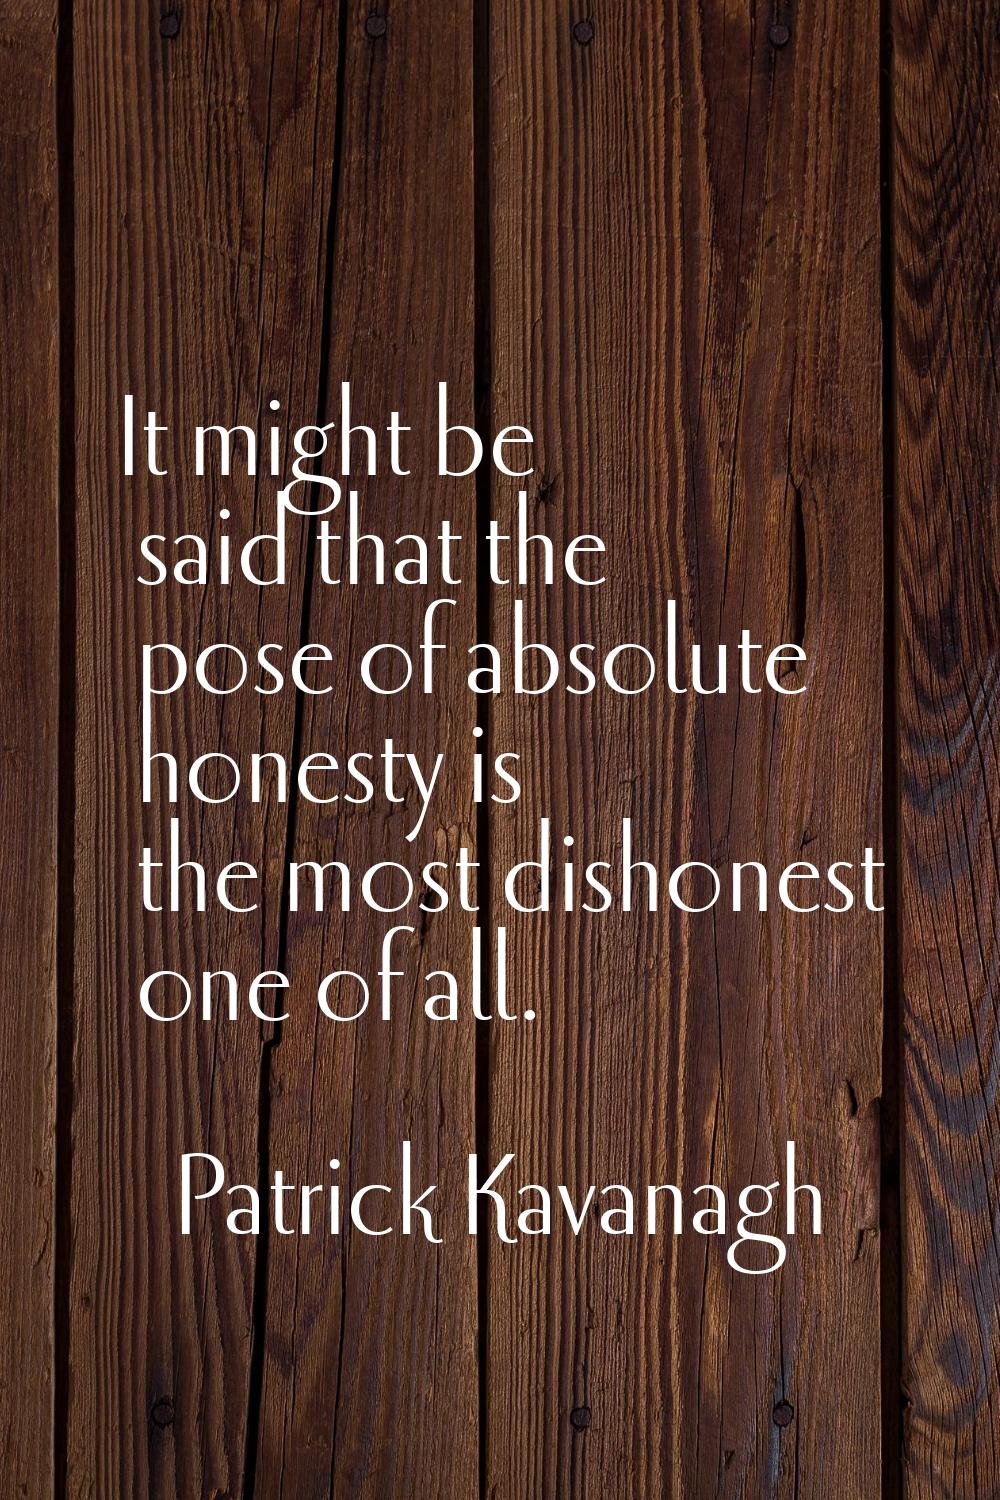 It might be said that the pose of absolute honesty is the most dishonest one of all.